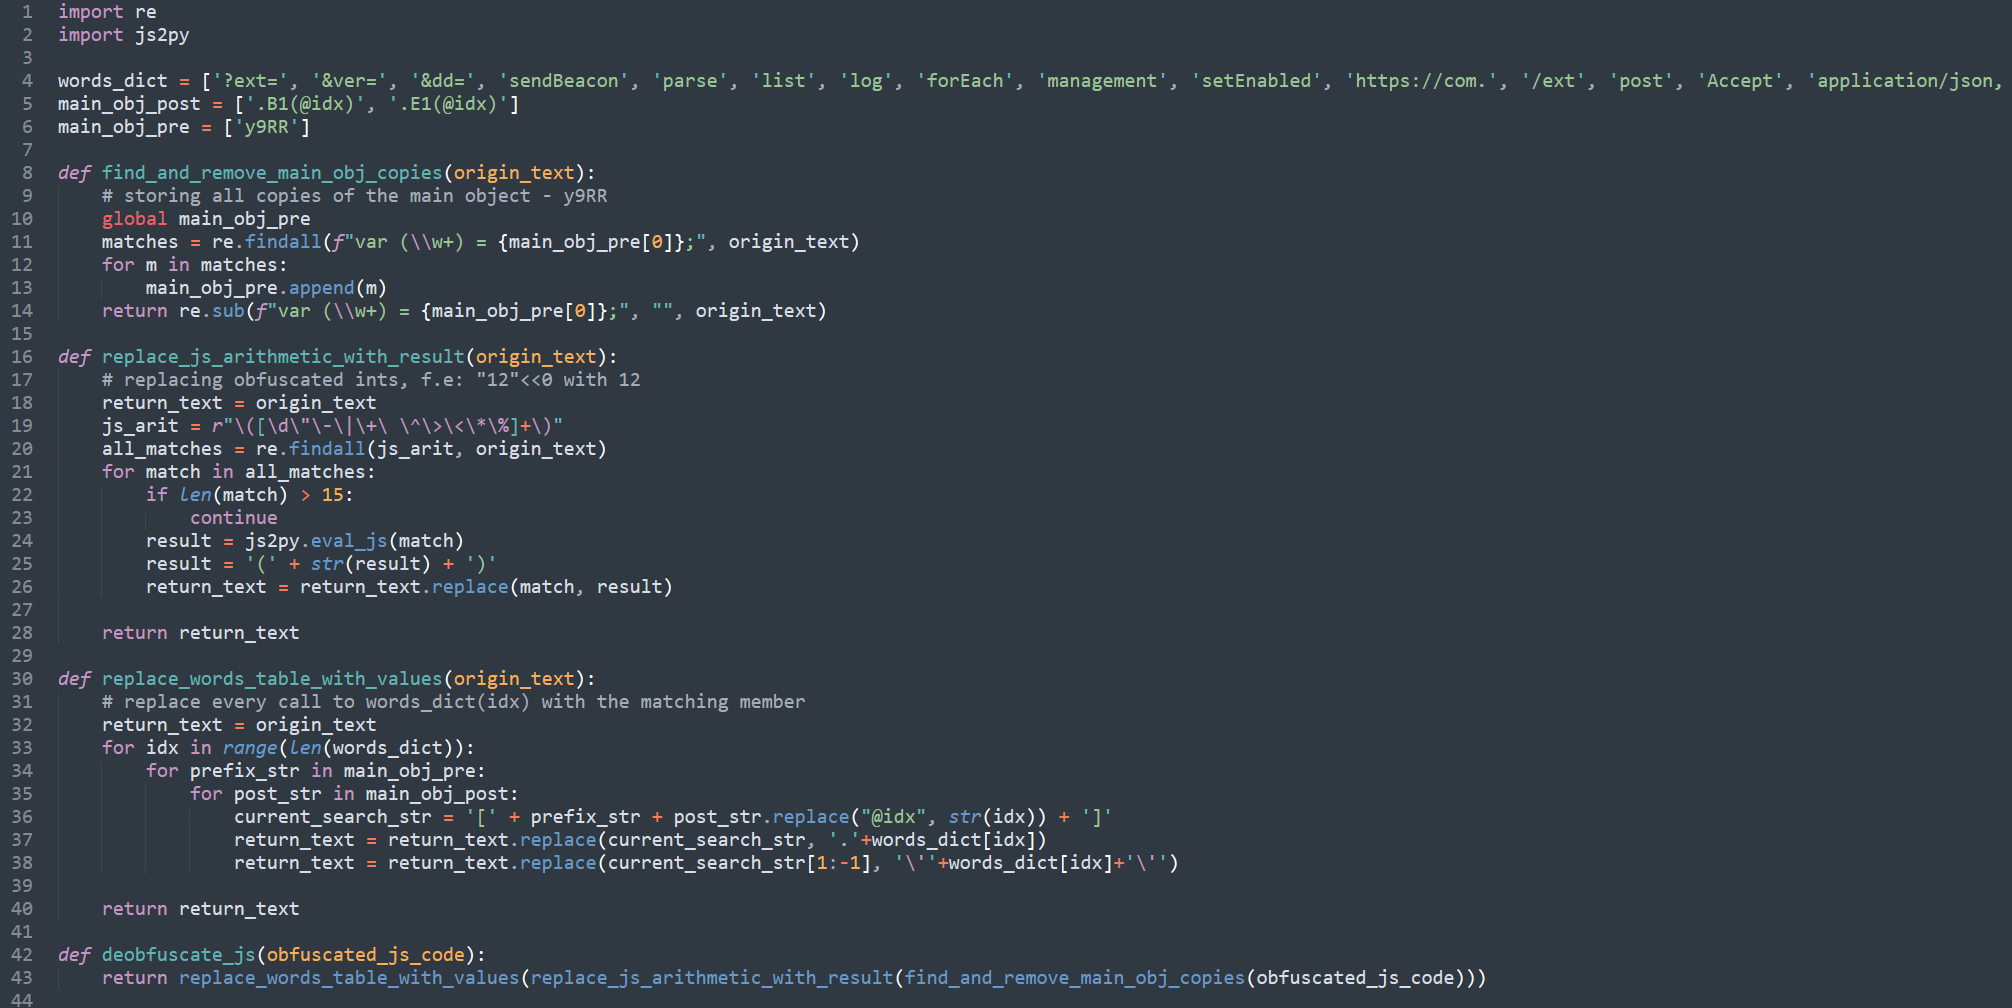 We used a Python script as shown to deobfuscate the remaining sections of the JavaScript code.